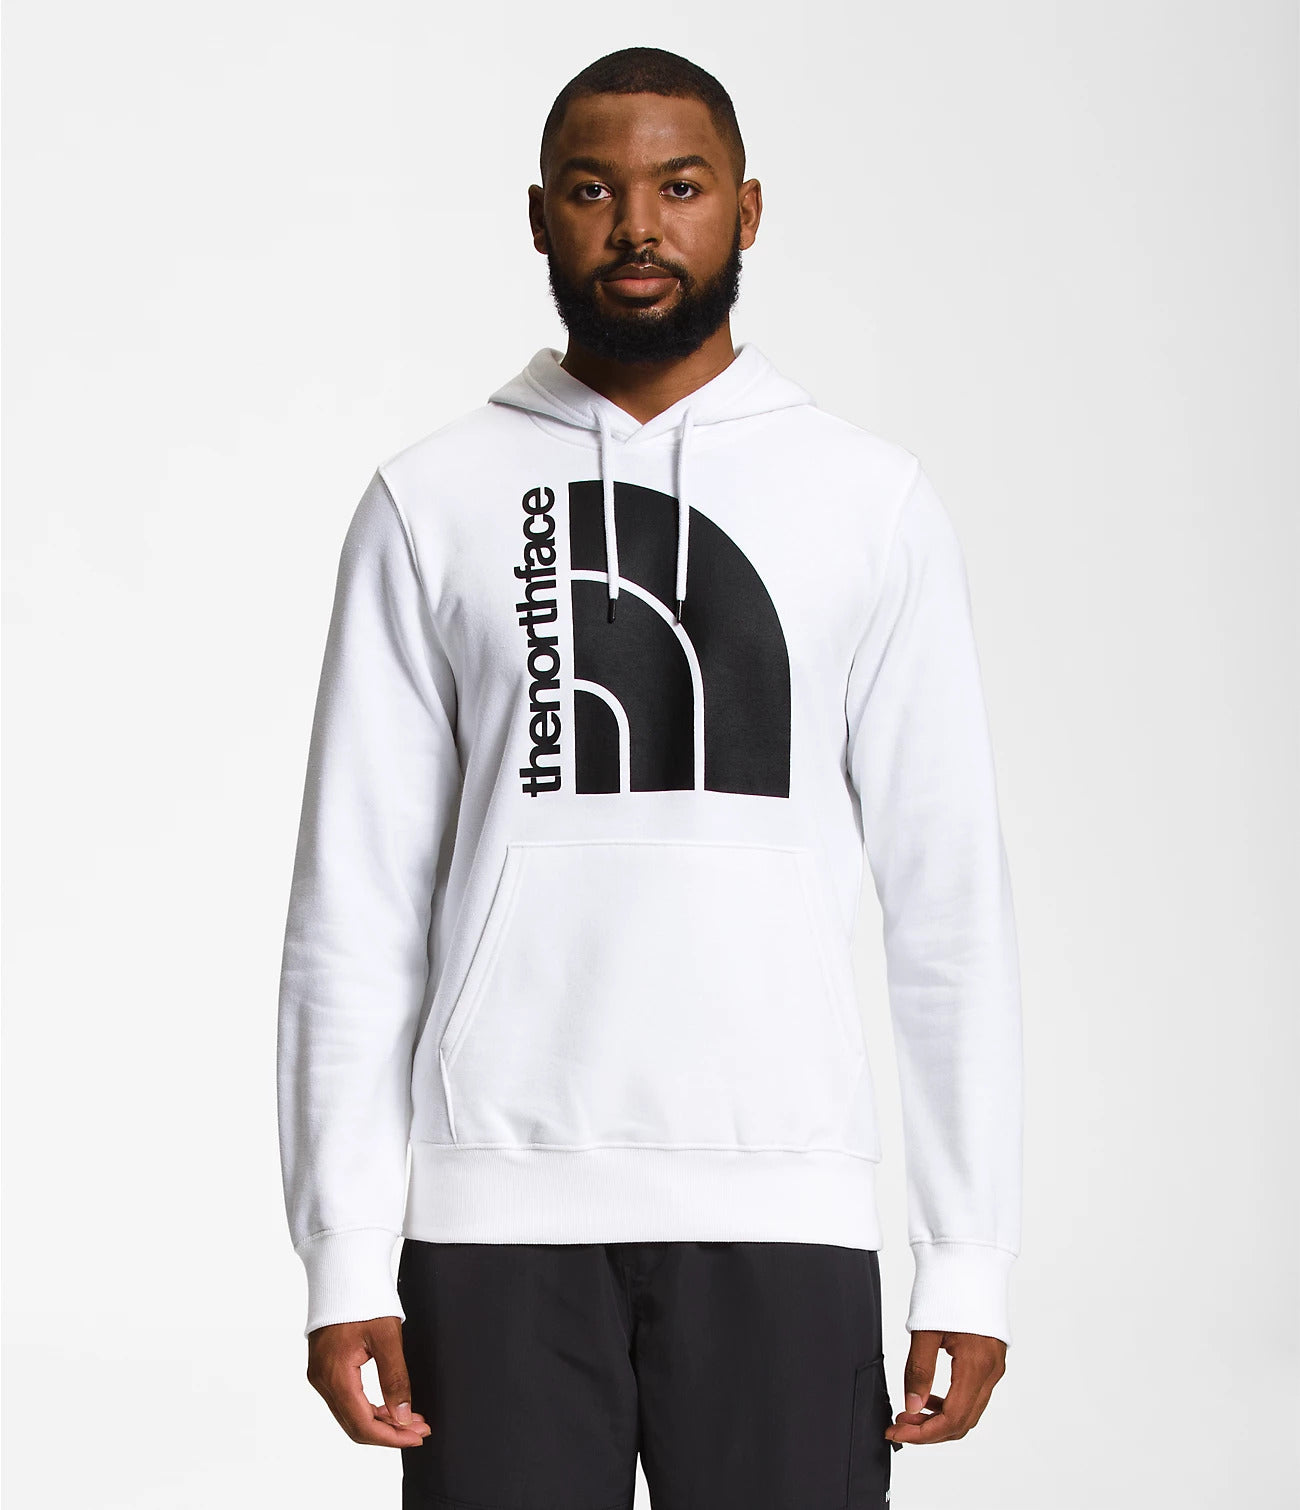 A North Face Men's Jumbo Half Dome Hoodie, in the color white.